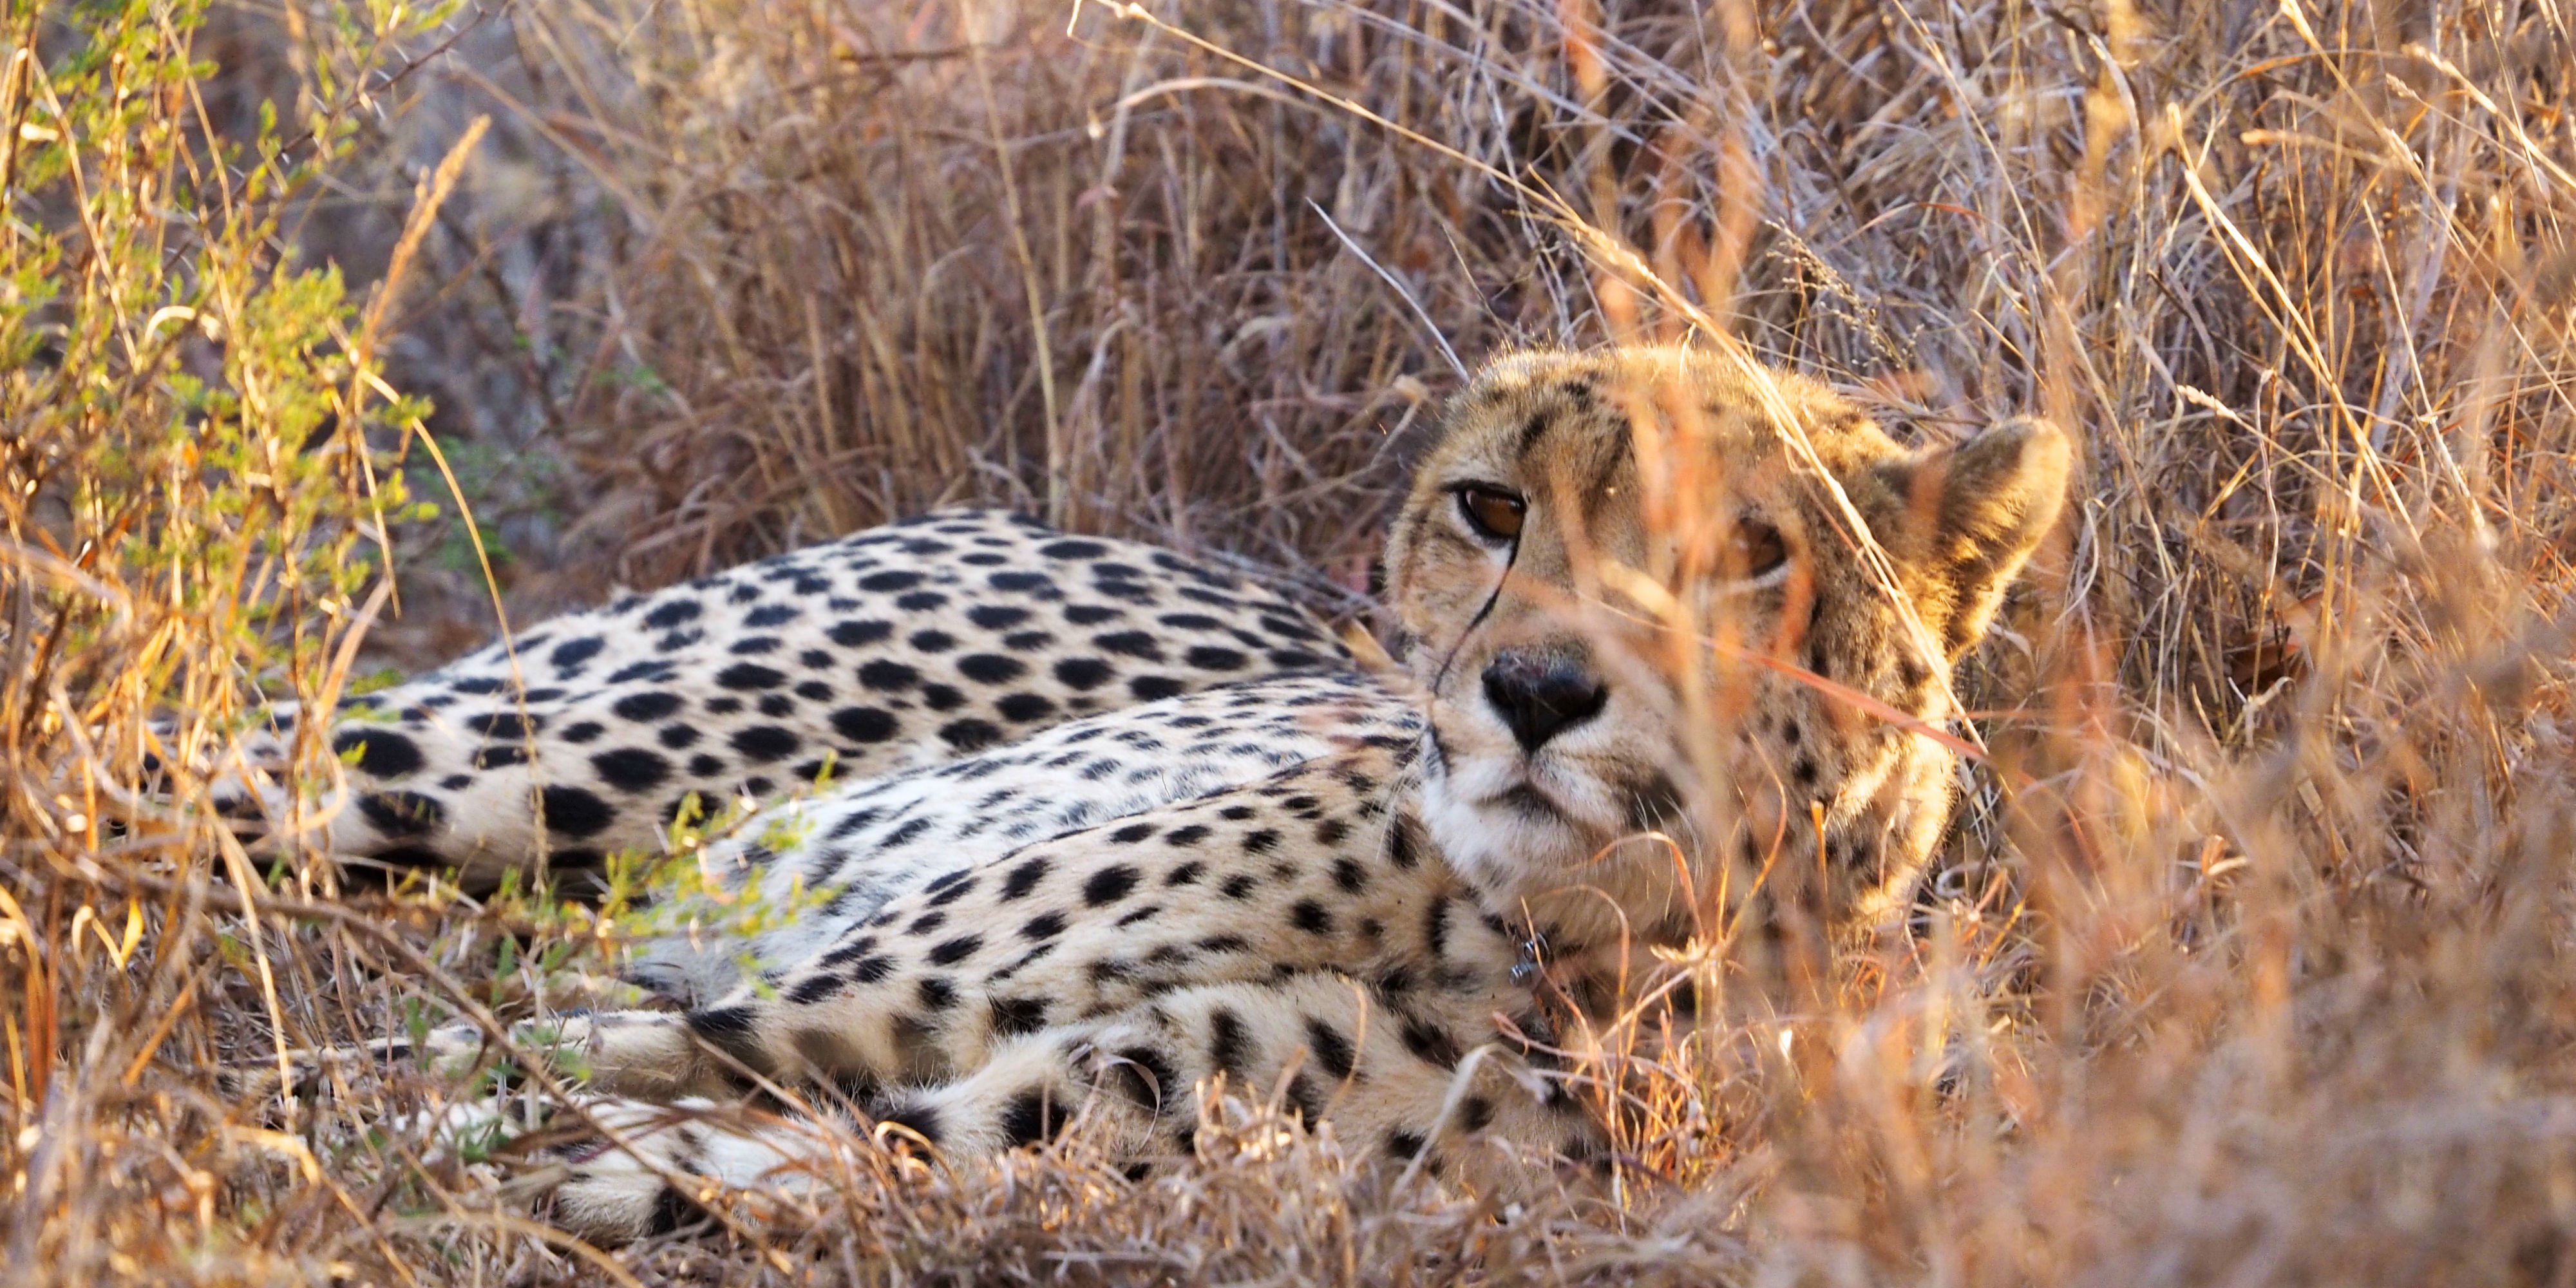 A female cheetah peers through the South African grassland. She is monitored as part of the GVI animal volunteer programs.